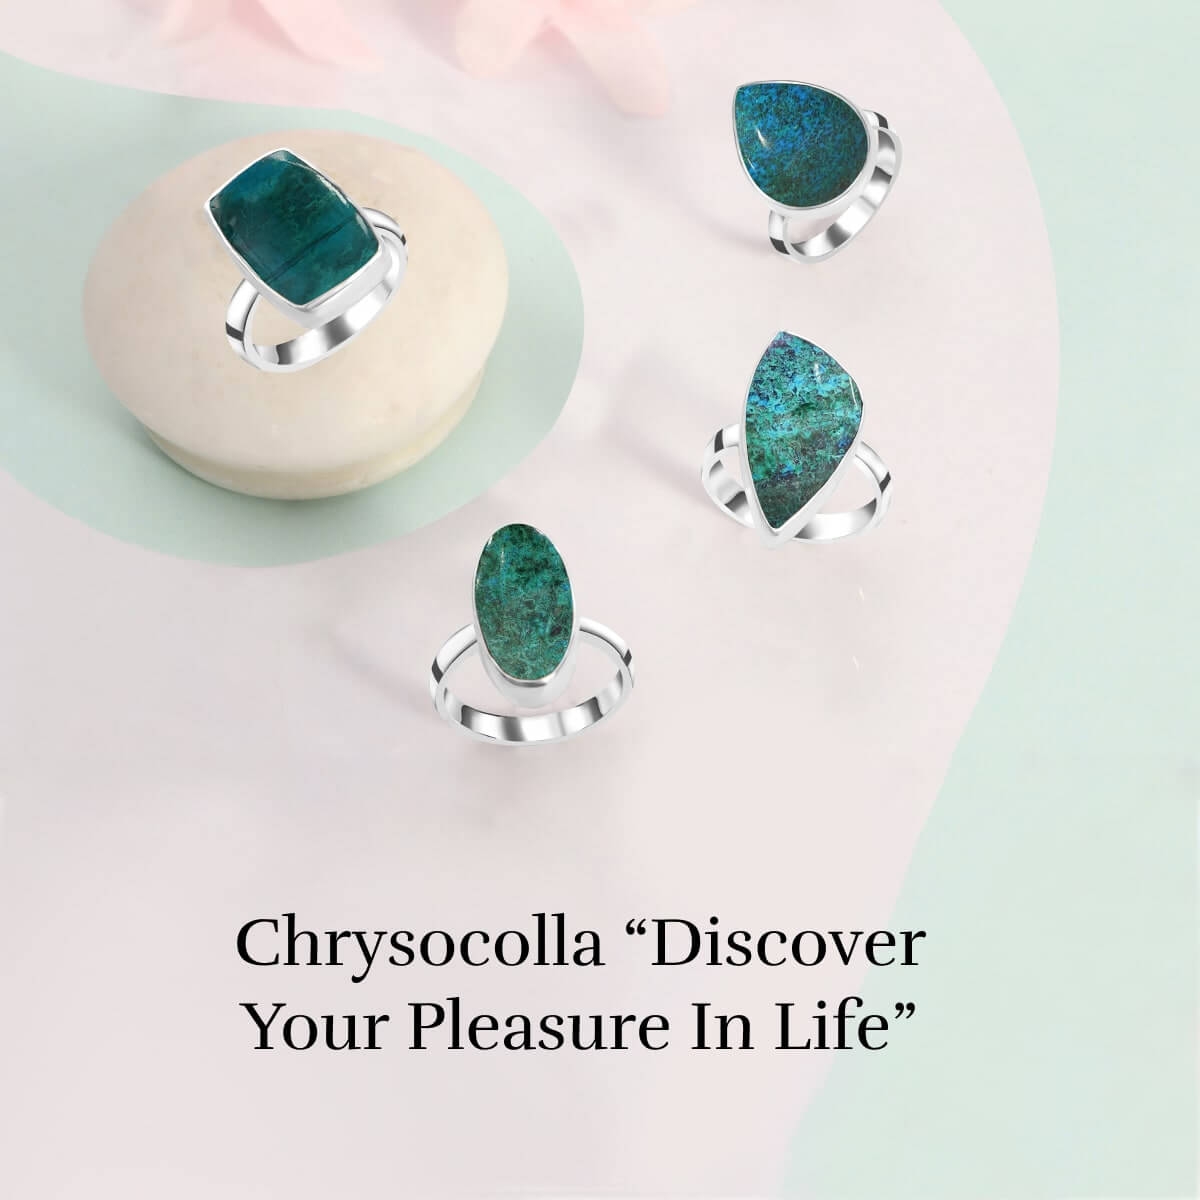 Benefits of Chrysocolla for your house and workplace